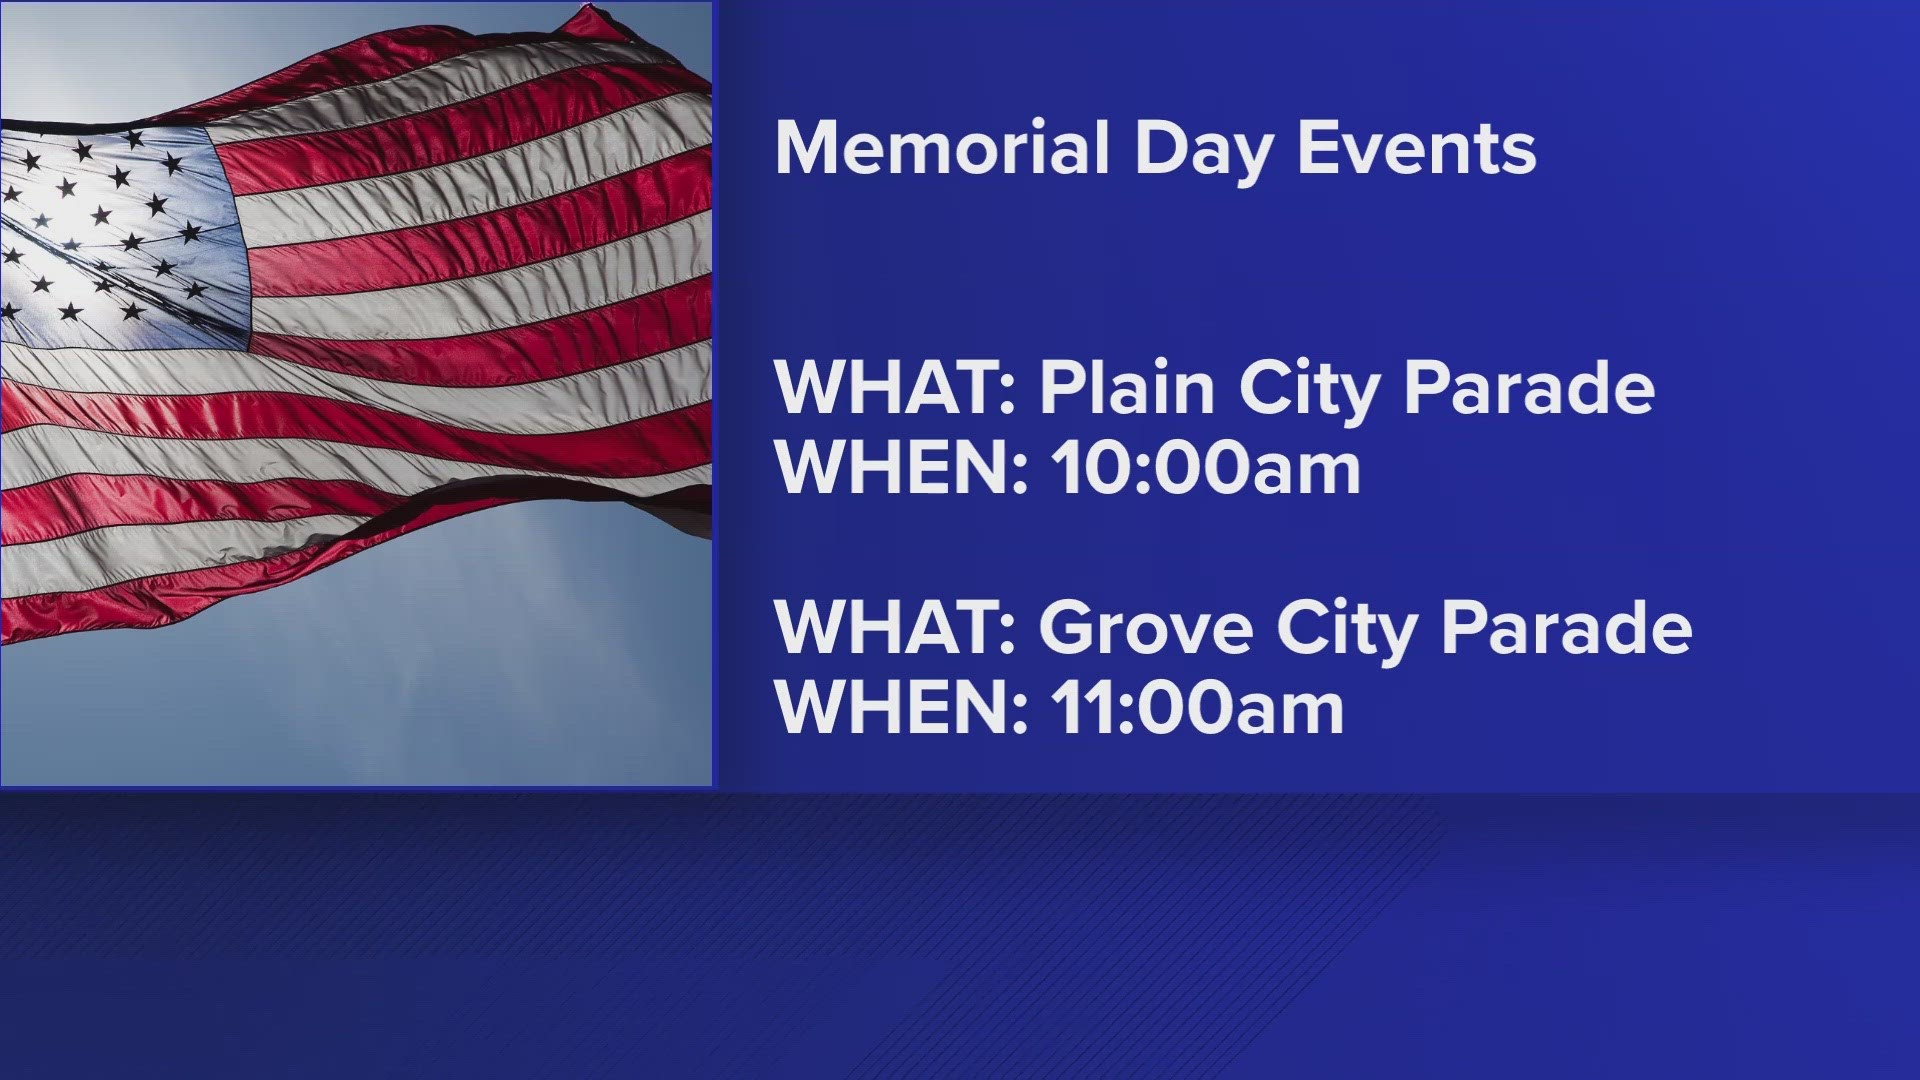 10TV has compiled a list of events honoring central Ohioans veterans who served and made the ultimate sacrifice.